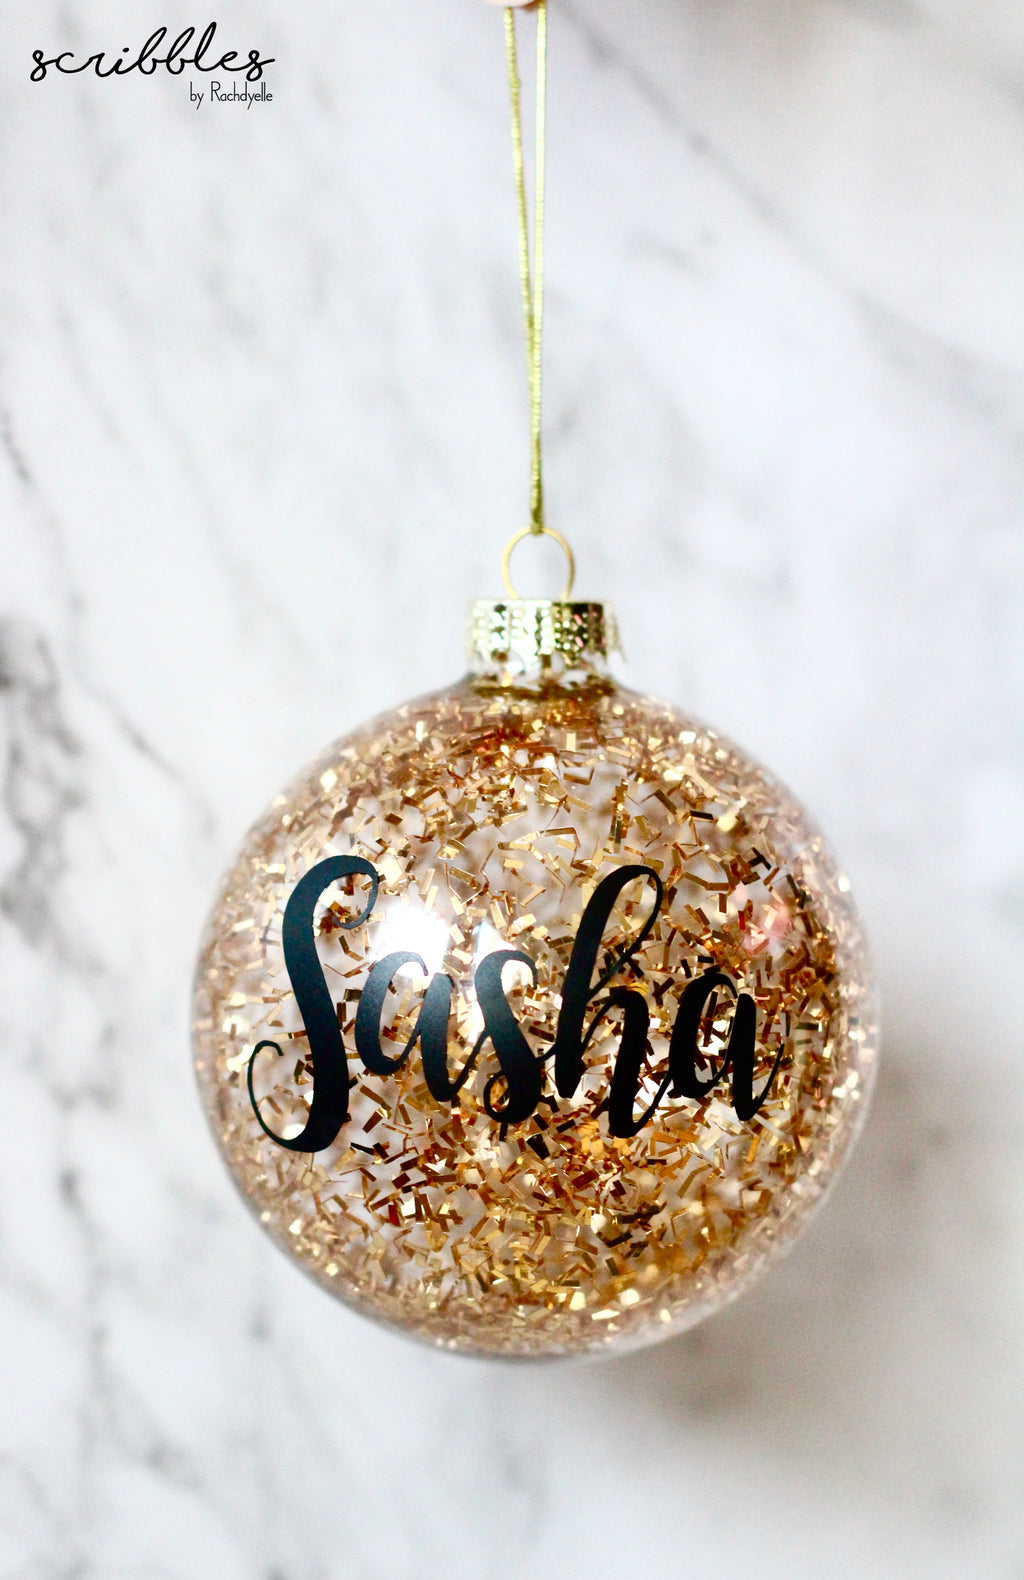 Personalised Christmas Bauble - Scribbles by Rachdyelle